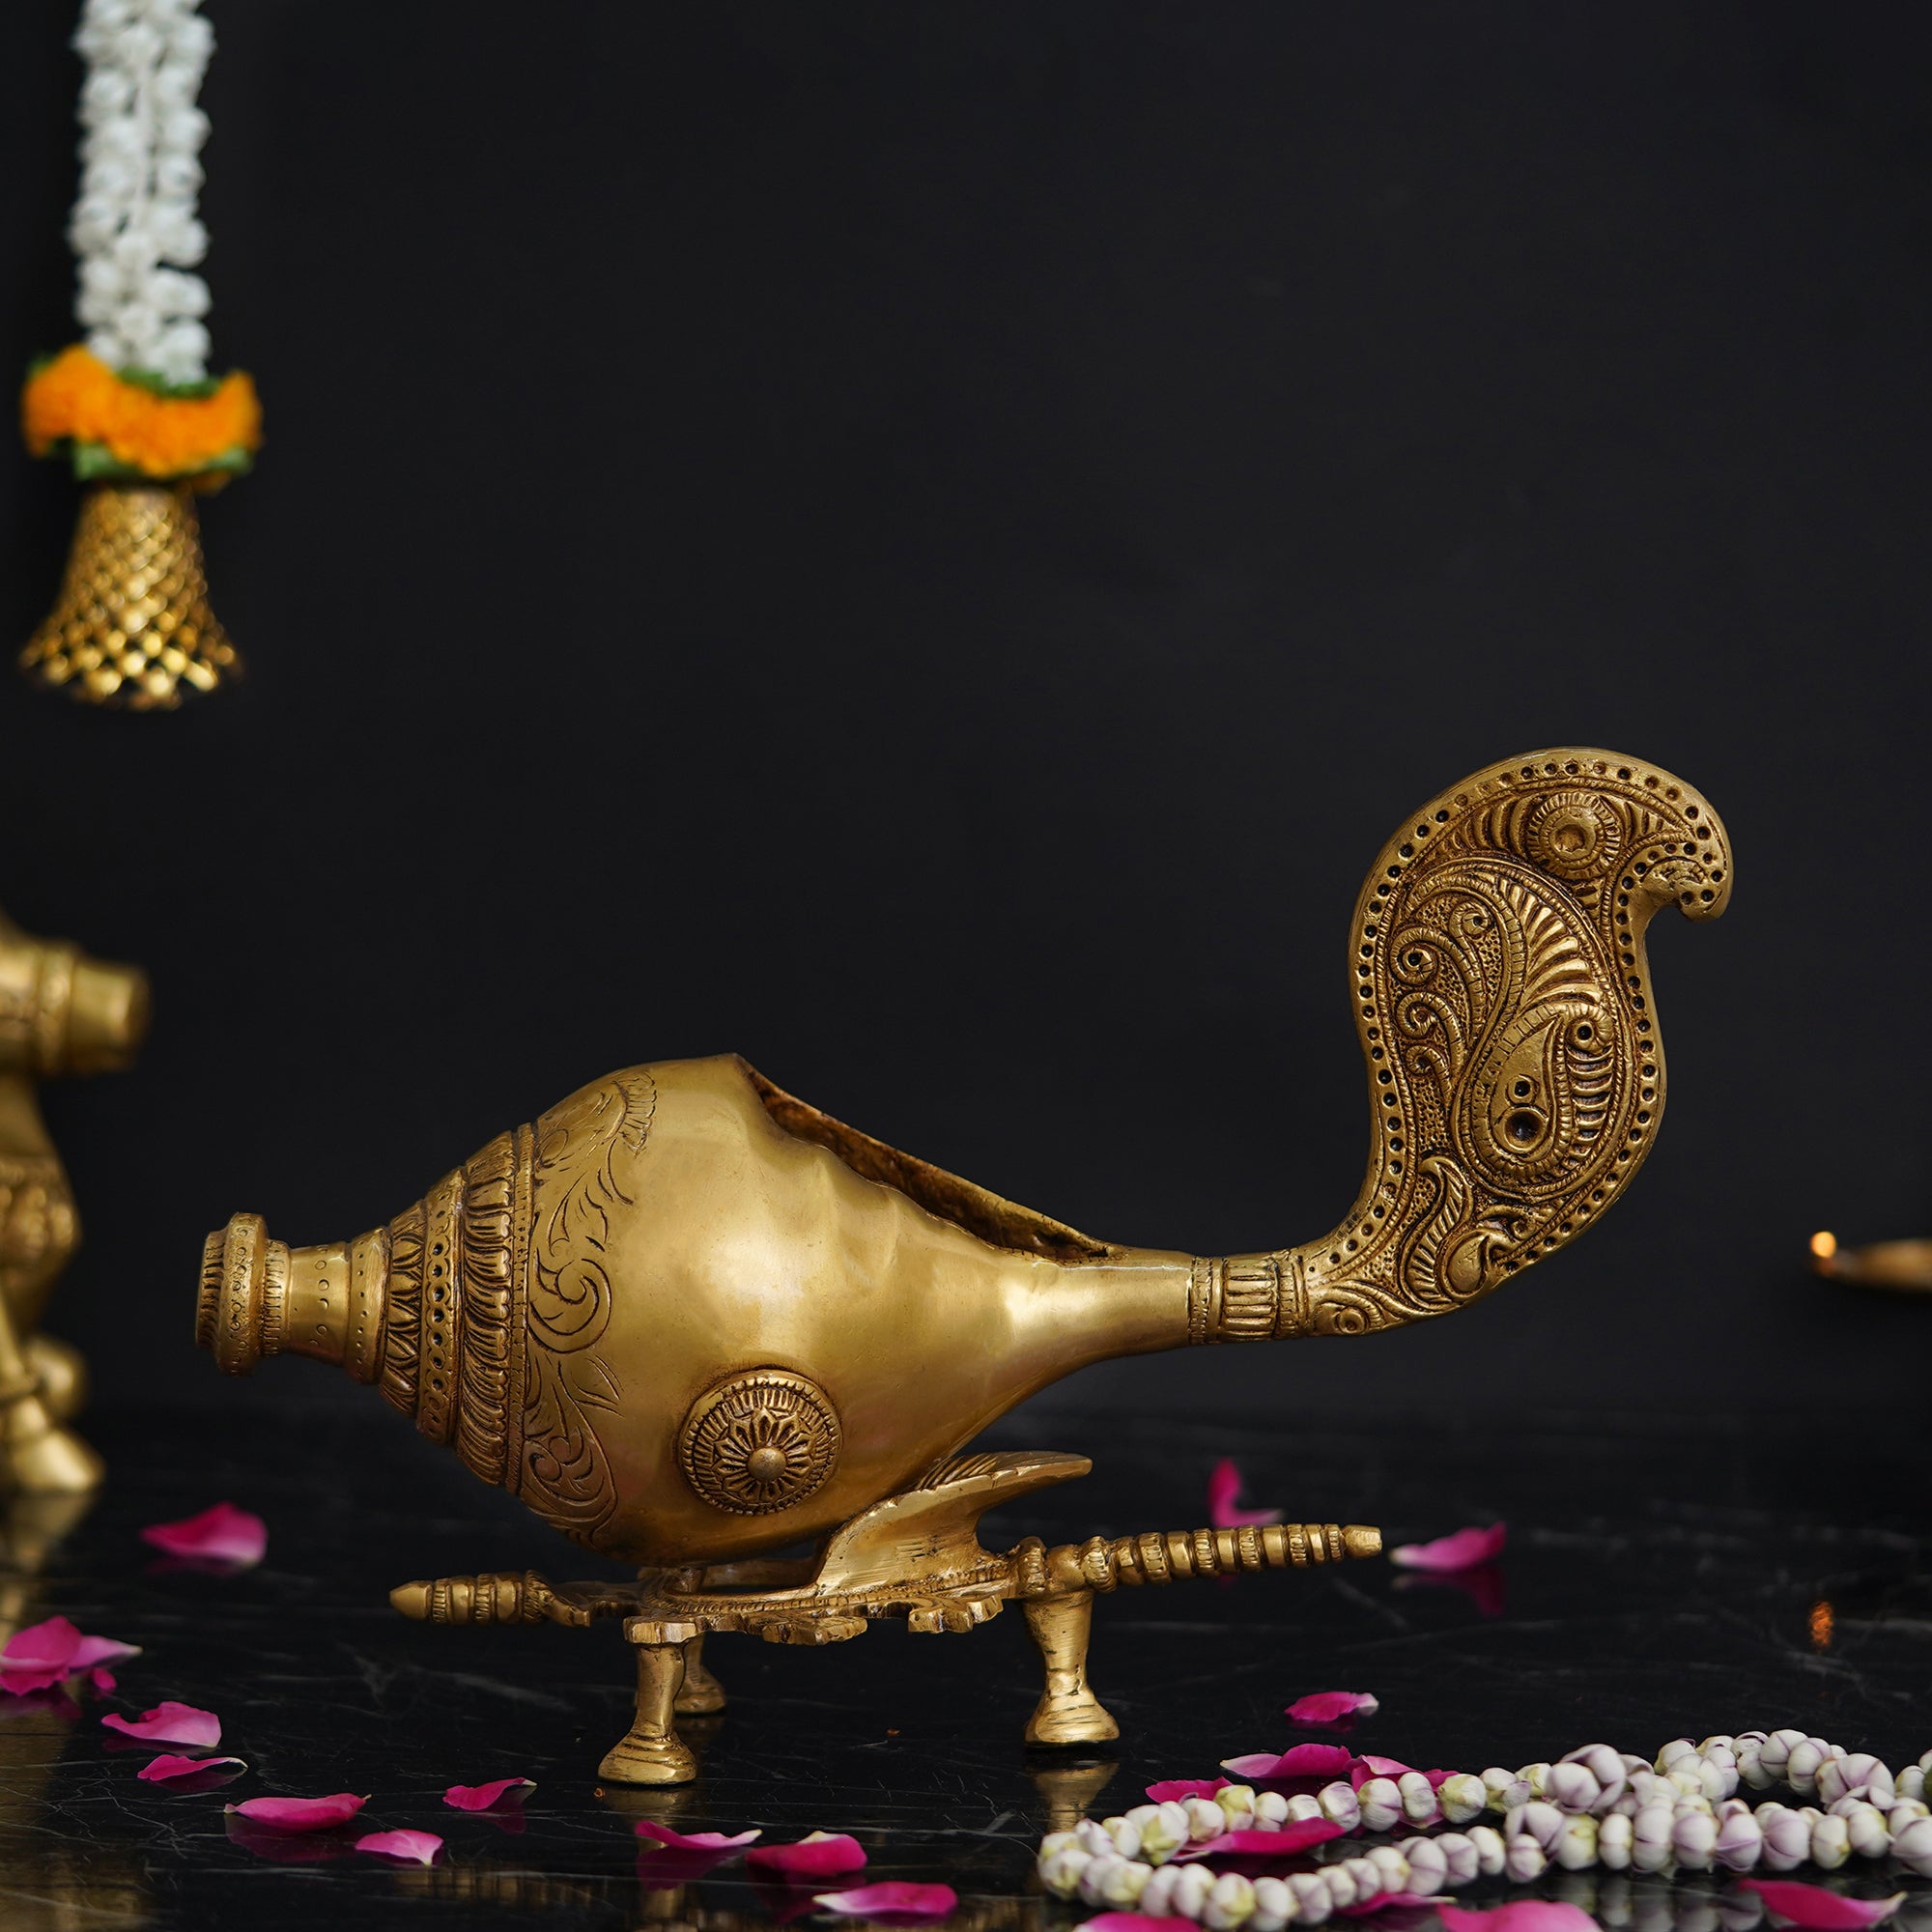 Golden Shankh (Conch) with a Stand Decorative Handcrafted Brass Showpiece